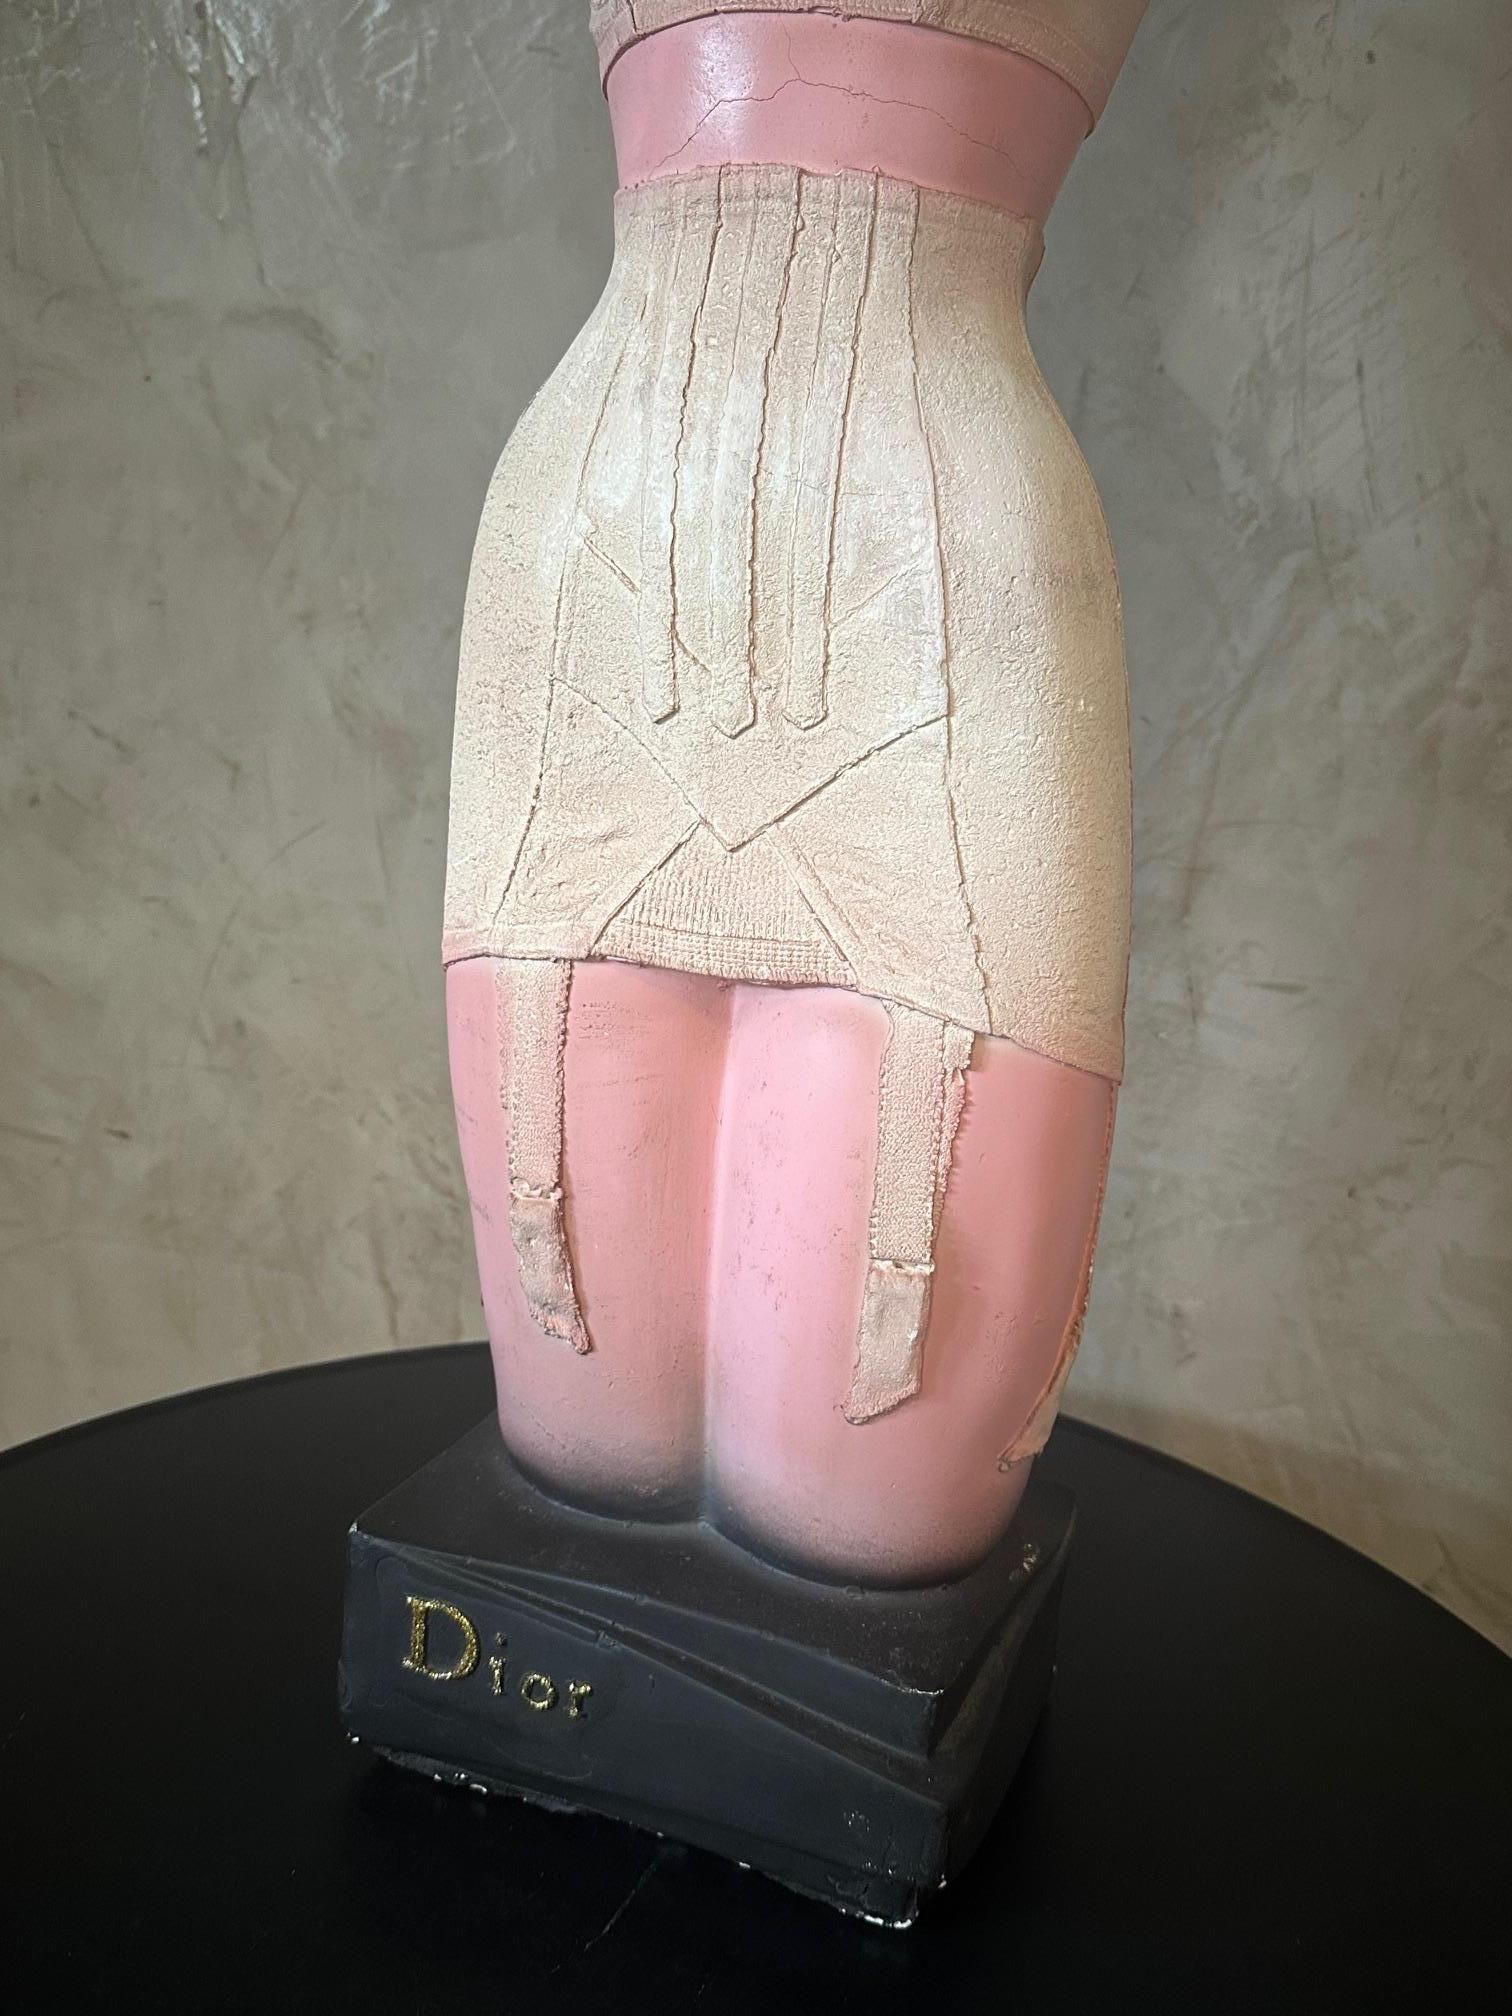 20th century French Plaster Bust For Dior Advertisement, 1950s For Sale 2